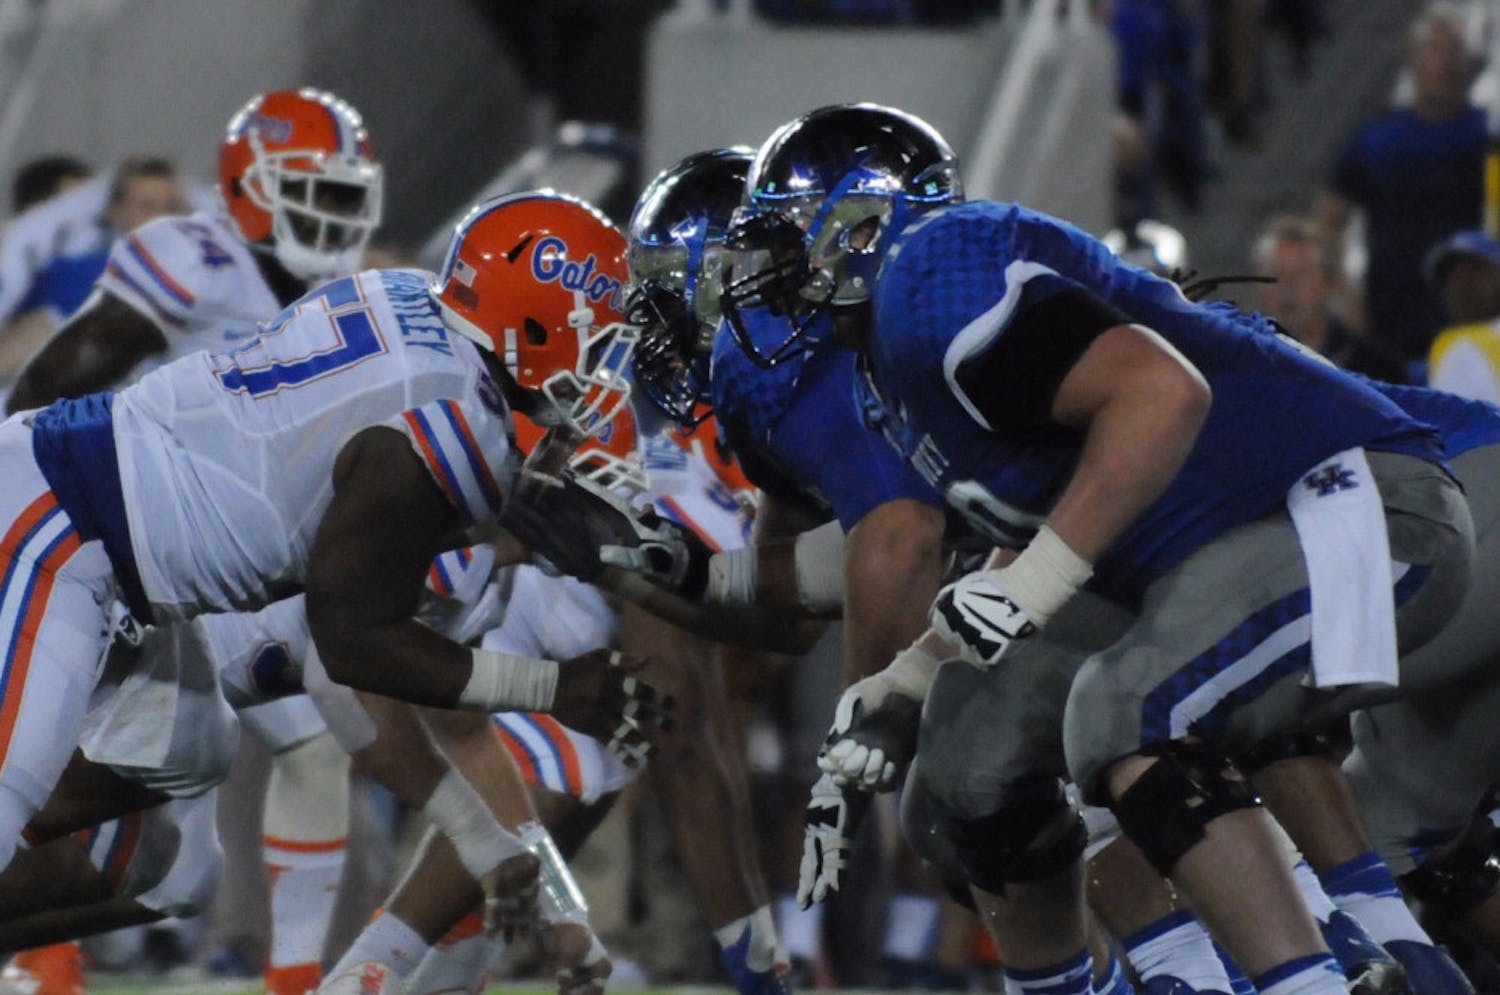 UF defensive lineman Caleb Brantley lines up during Florida's 14-9 win against Kentucky on Sept. 19, 2015, at Commonwealth Stadium in Lexington, Kentucky.